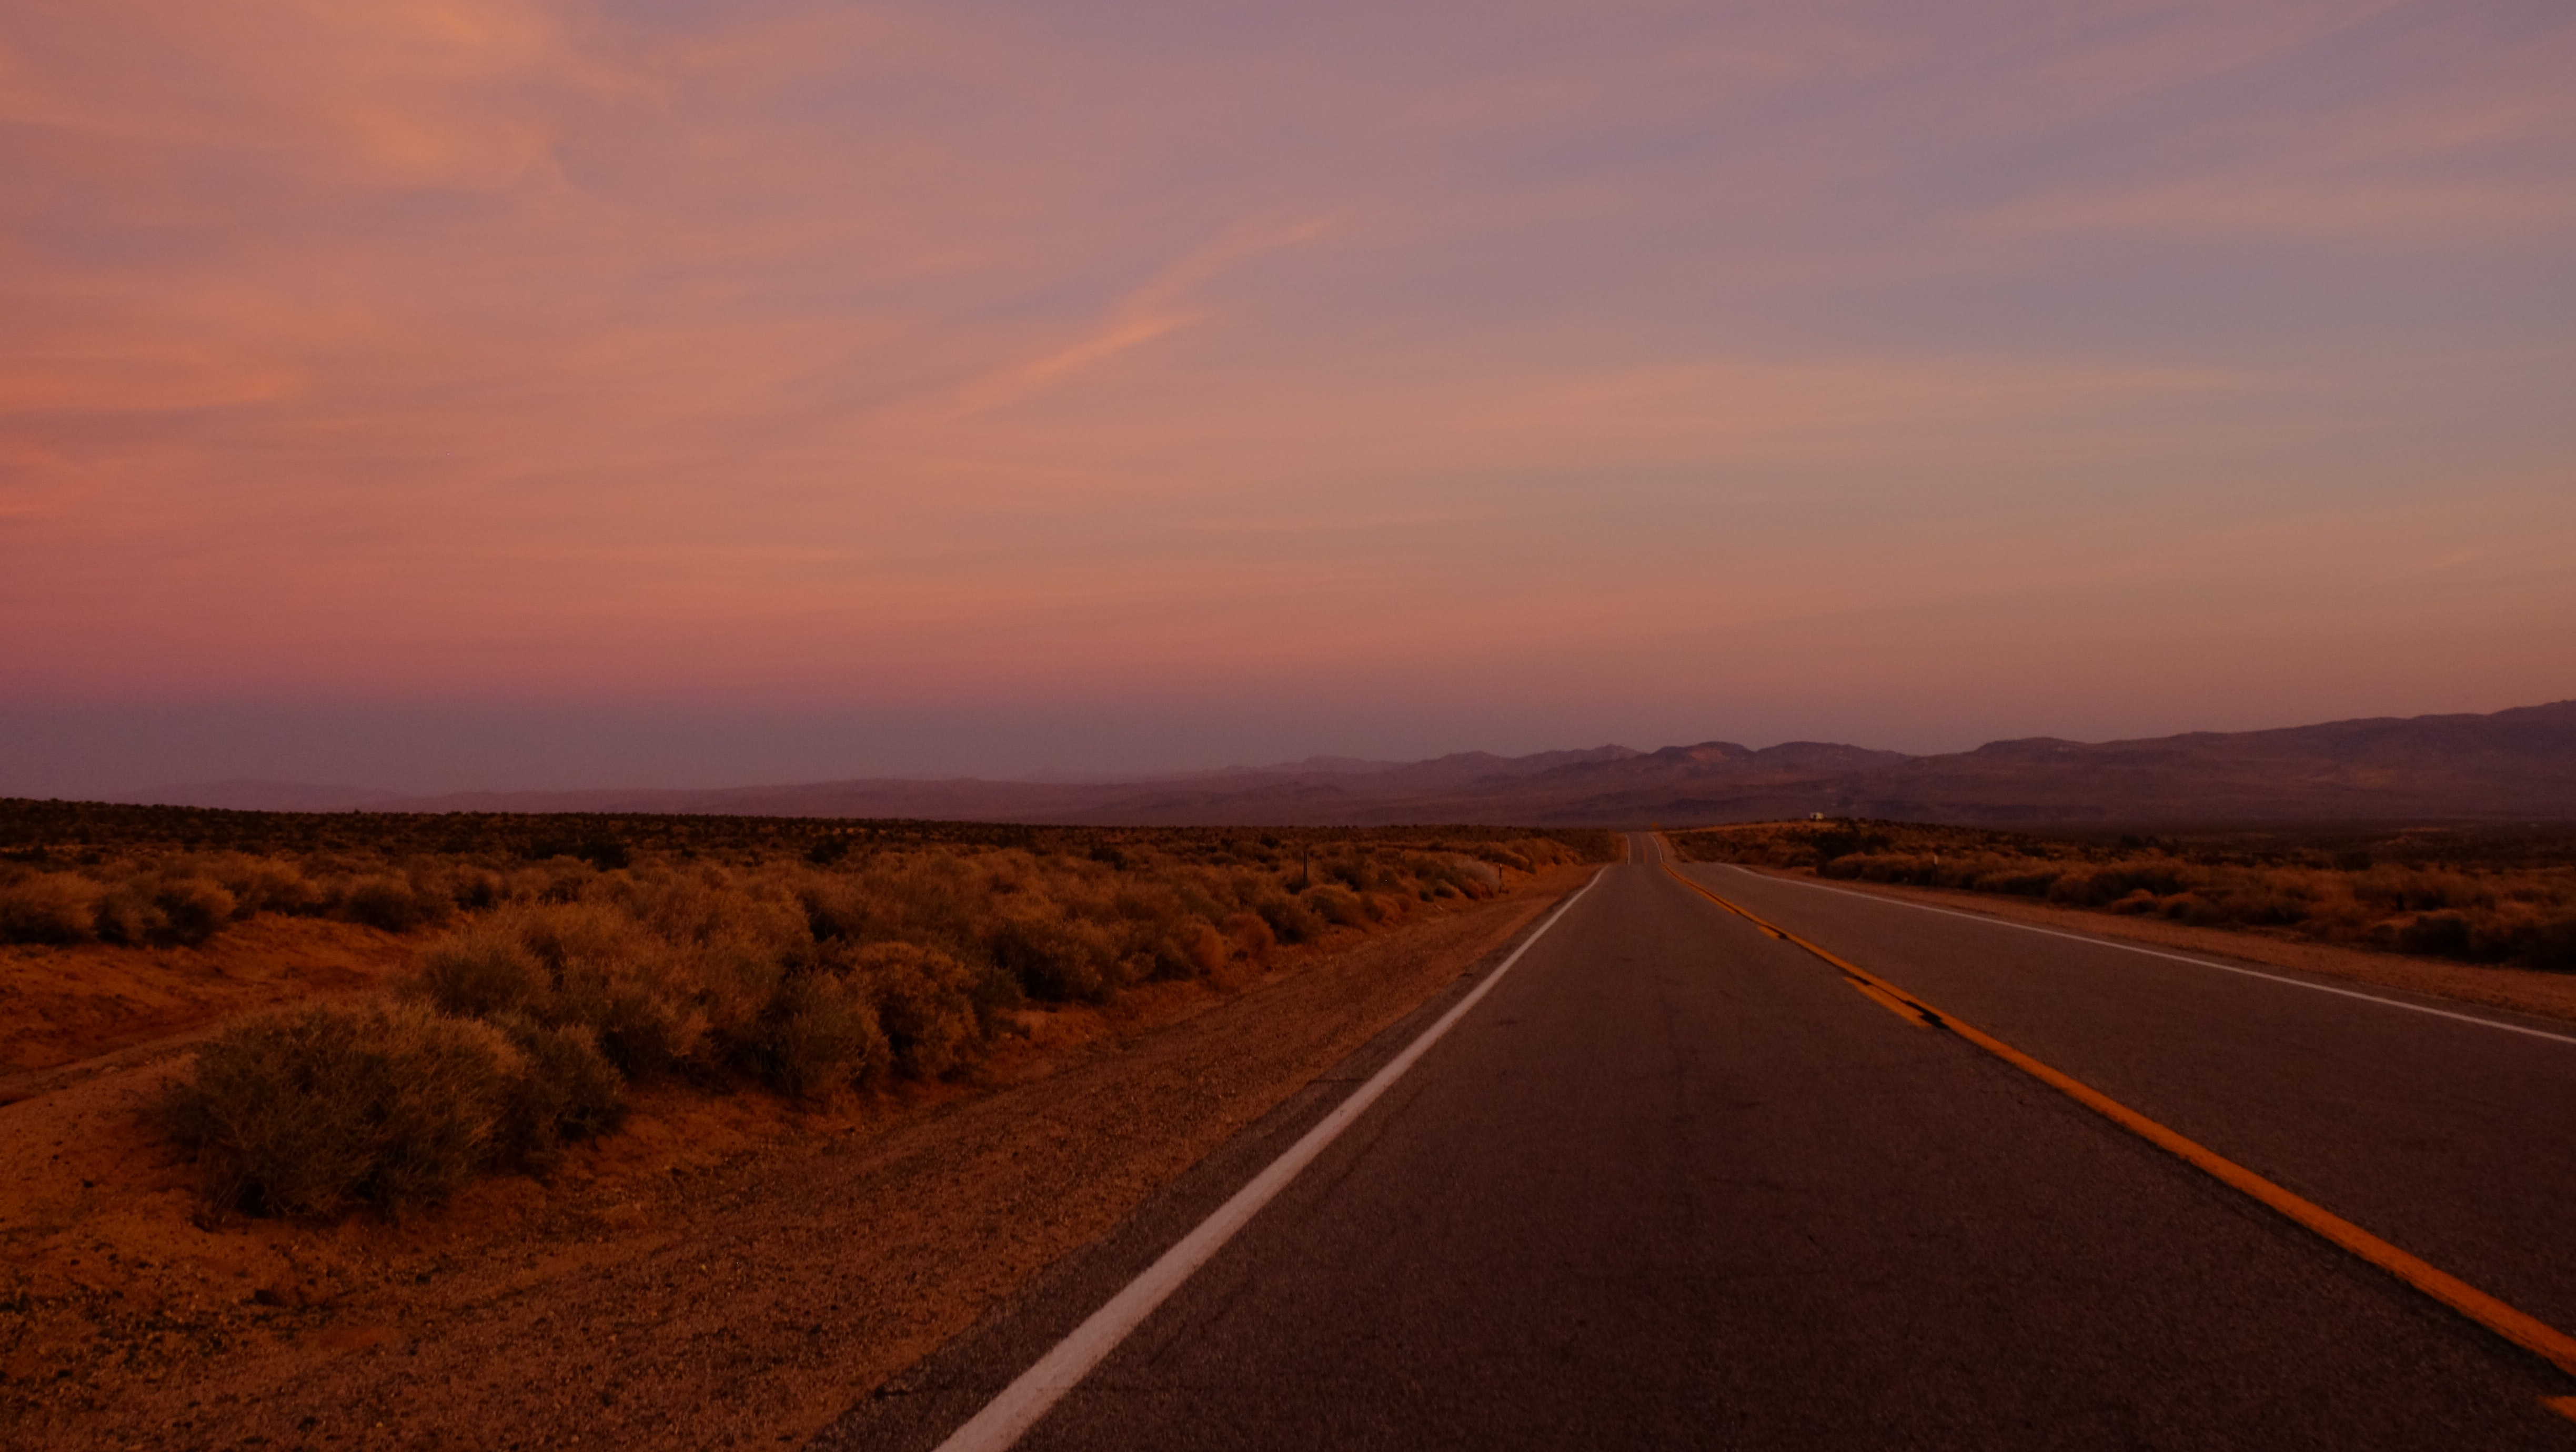 Empty Road in Dessert, Bushes, Remote, Travel, Sunset, HQ Photo